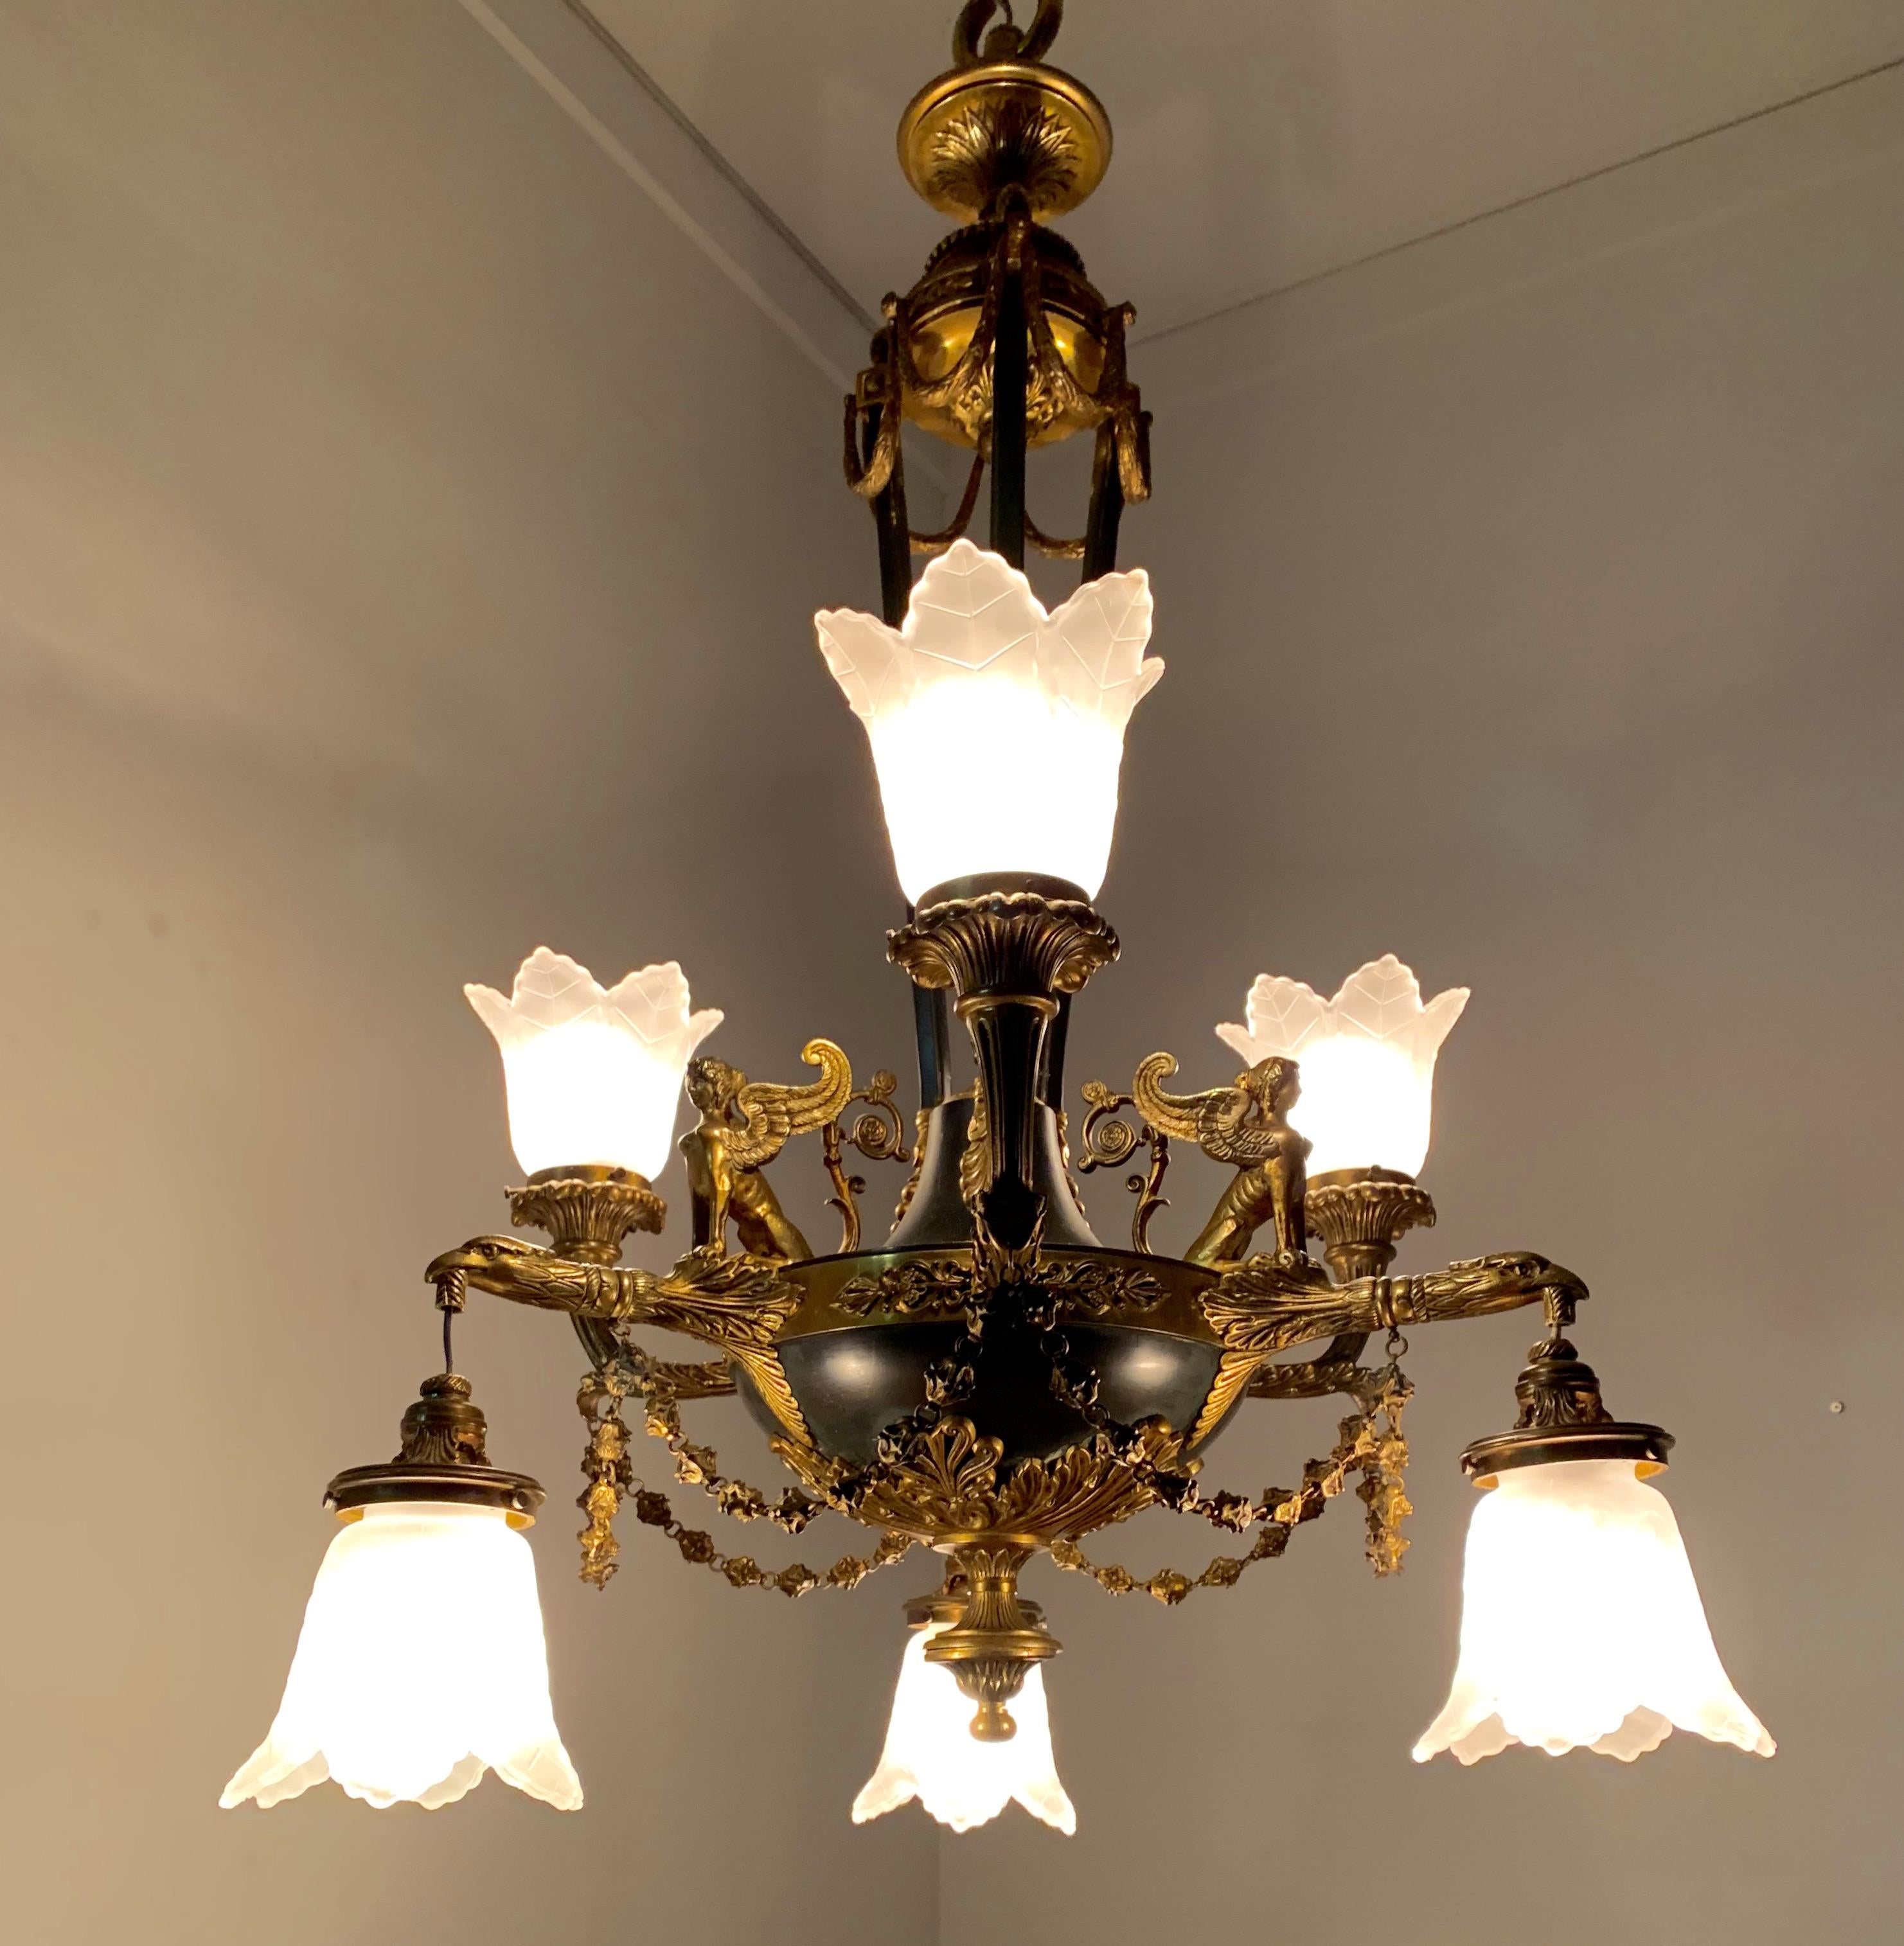 Stunning and large six-light chandelier with glass shades.

This top quality pendant light from the early 1900s is another one of our recent great finds. Both with the light switched on and off this quality antique can create just the right